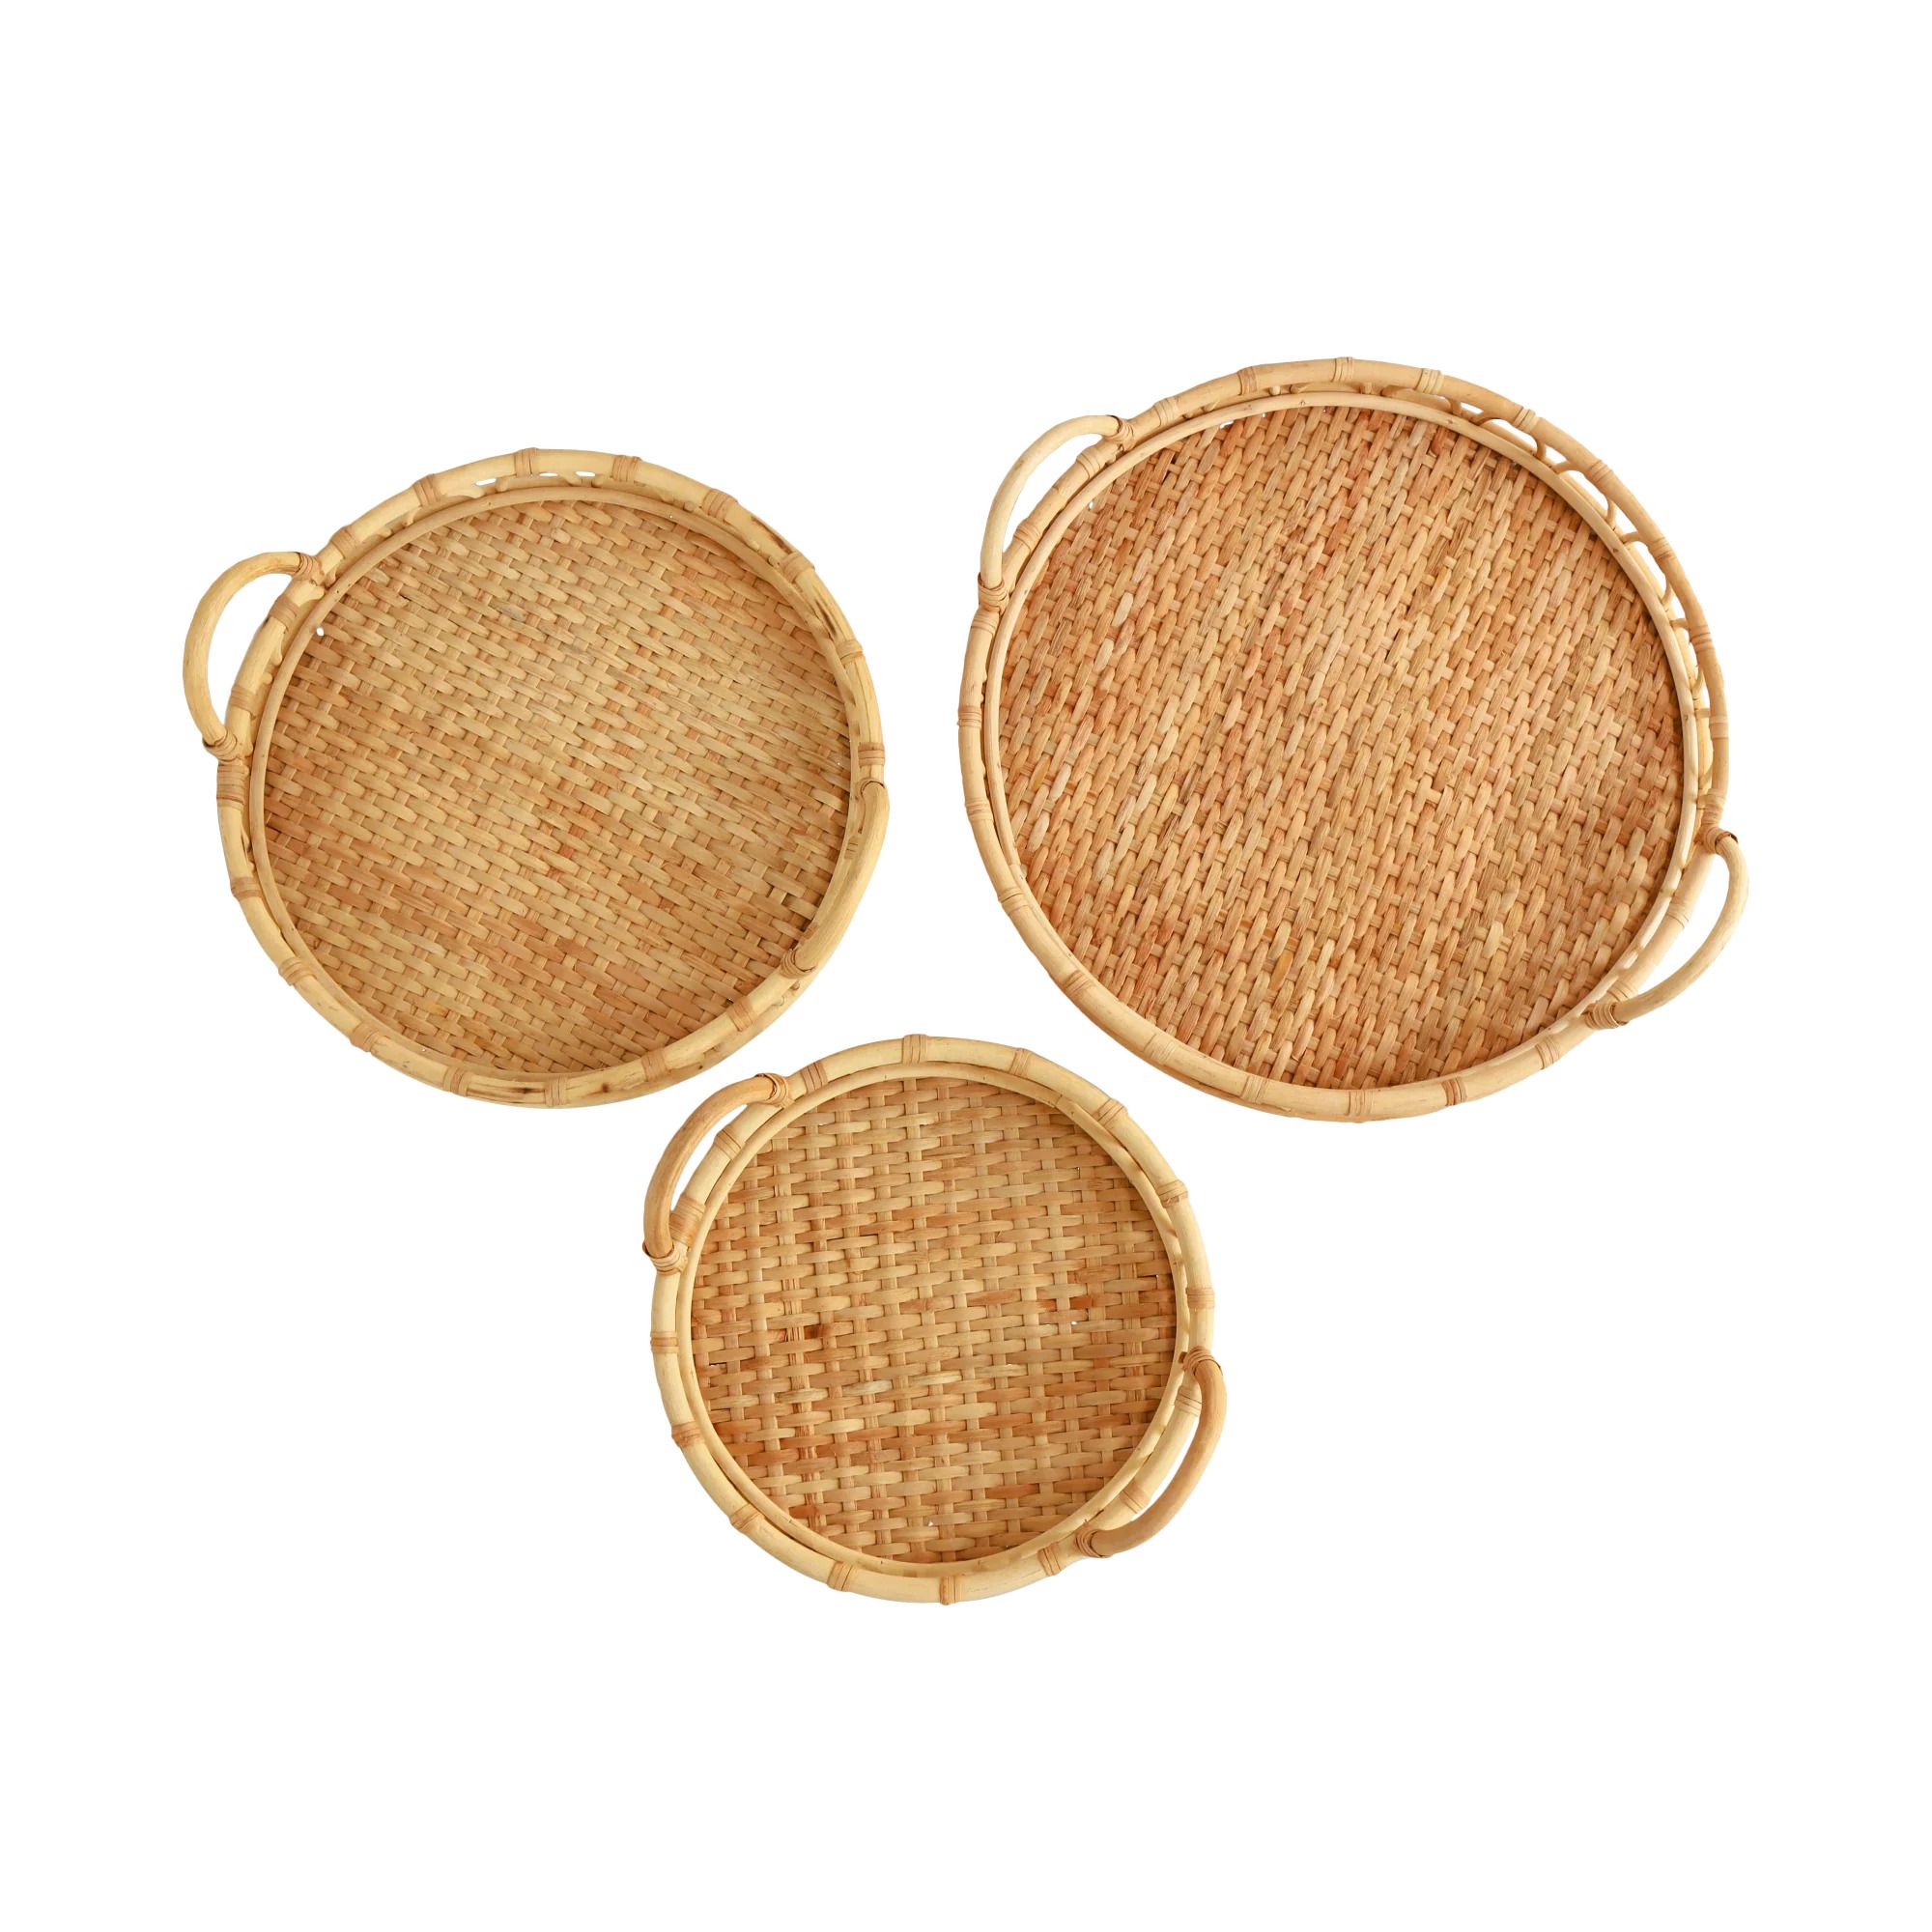 Eden Grace Hand Woven Round Rattan Serving Tray with Wavy Design and Handles, Tea Tray, Fruit Bas... | Walmart (US)